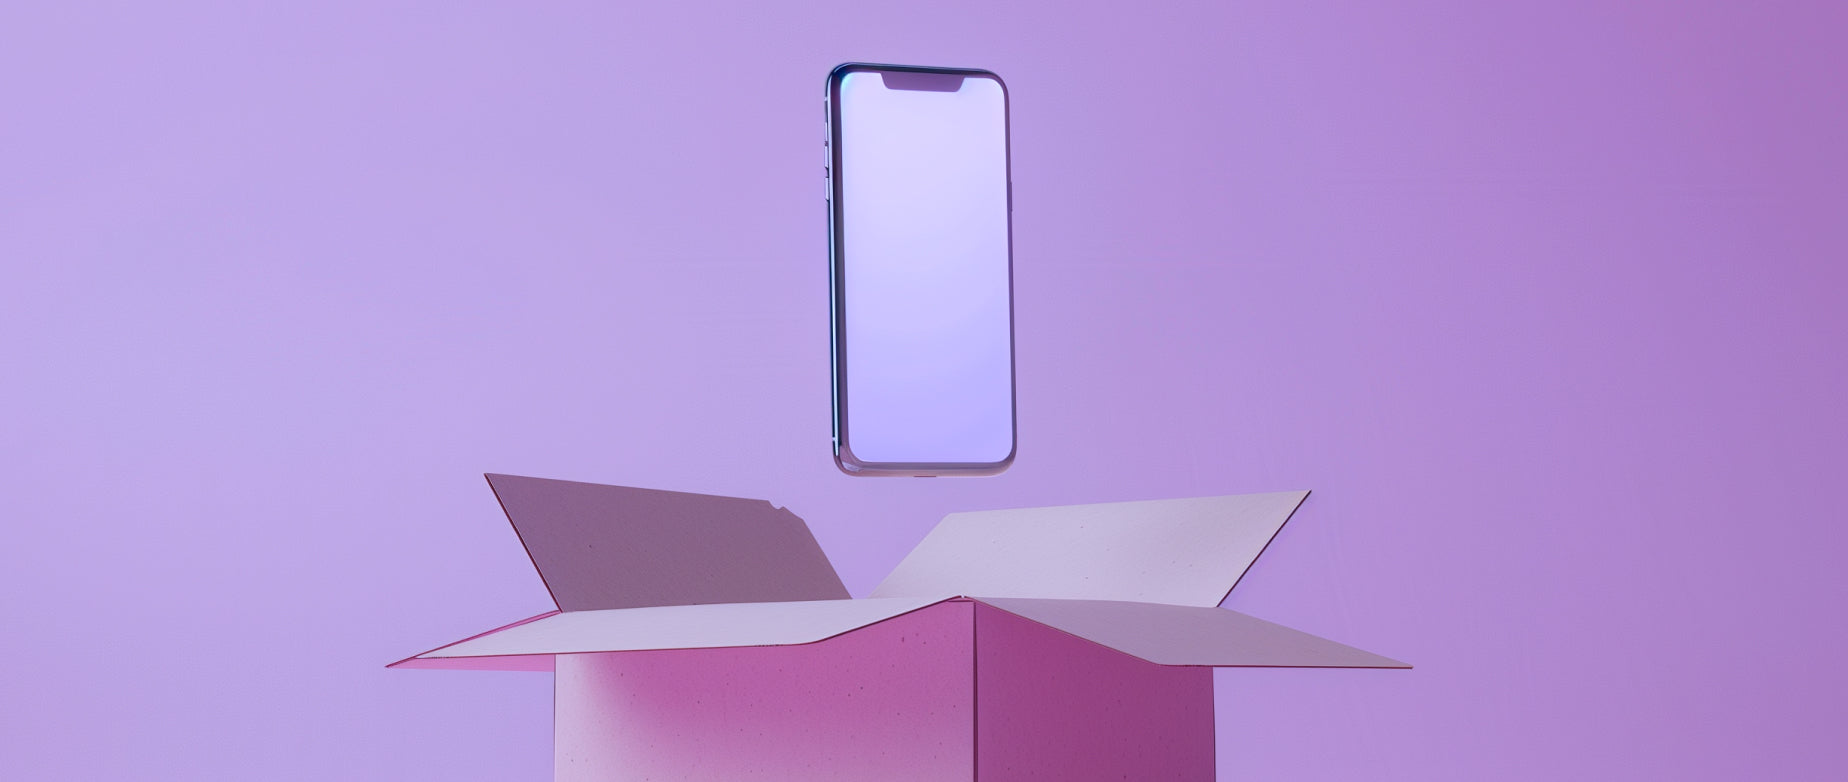 An open shipping box with a smartphone suspended over it on a purple background.